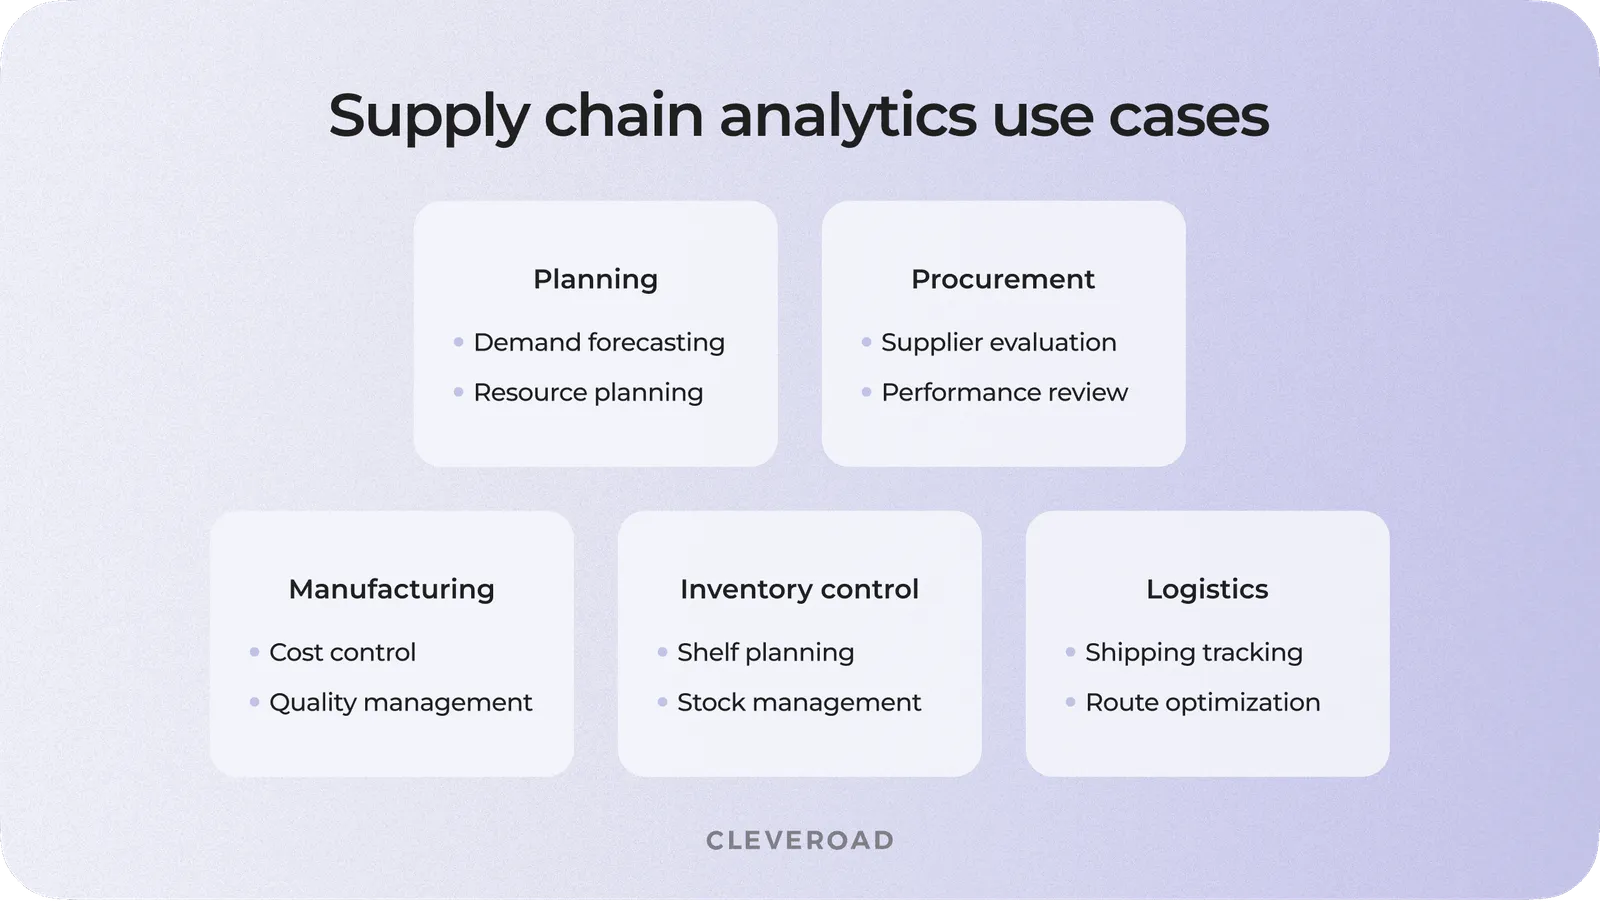 Supply chain analytics use cases